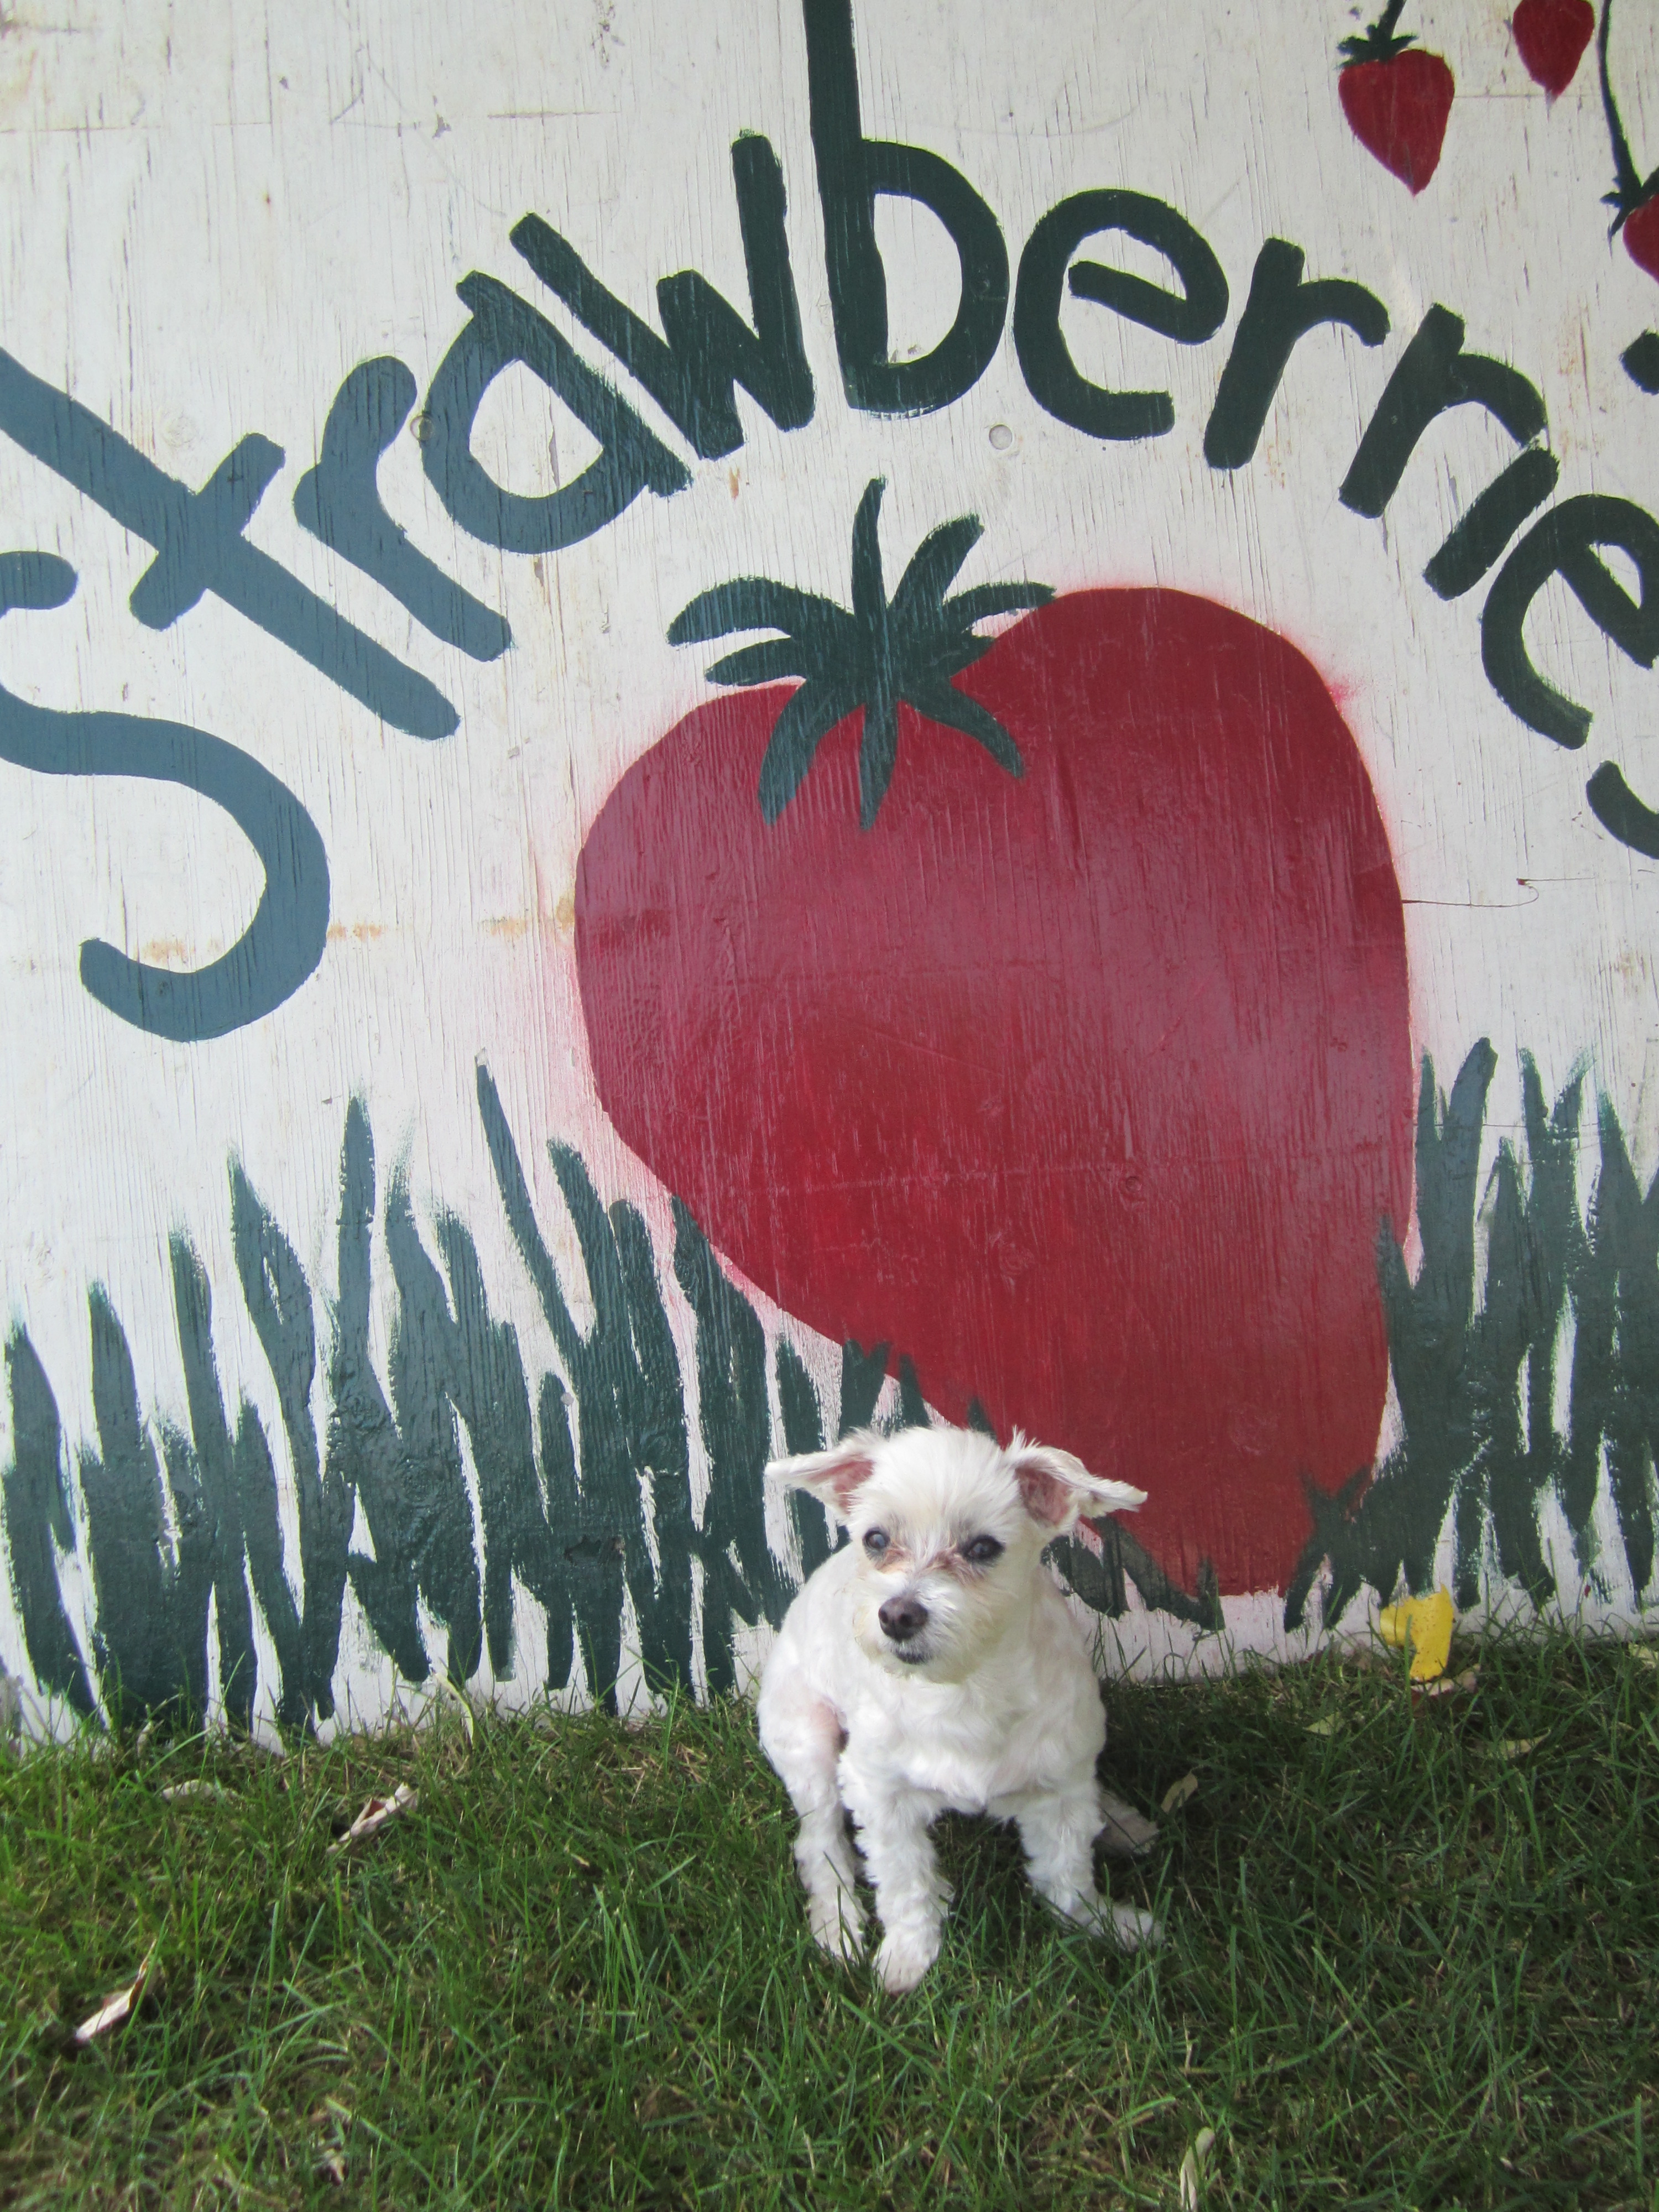 Strawberry Fields Forever! Strawberries are a dog's delight